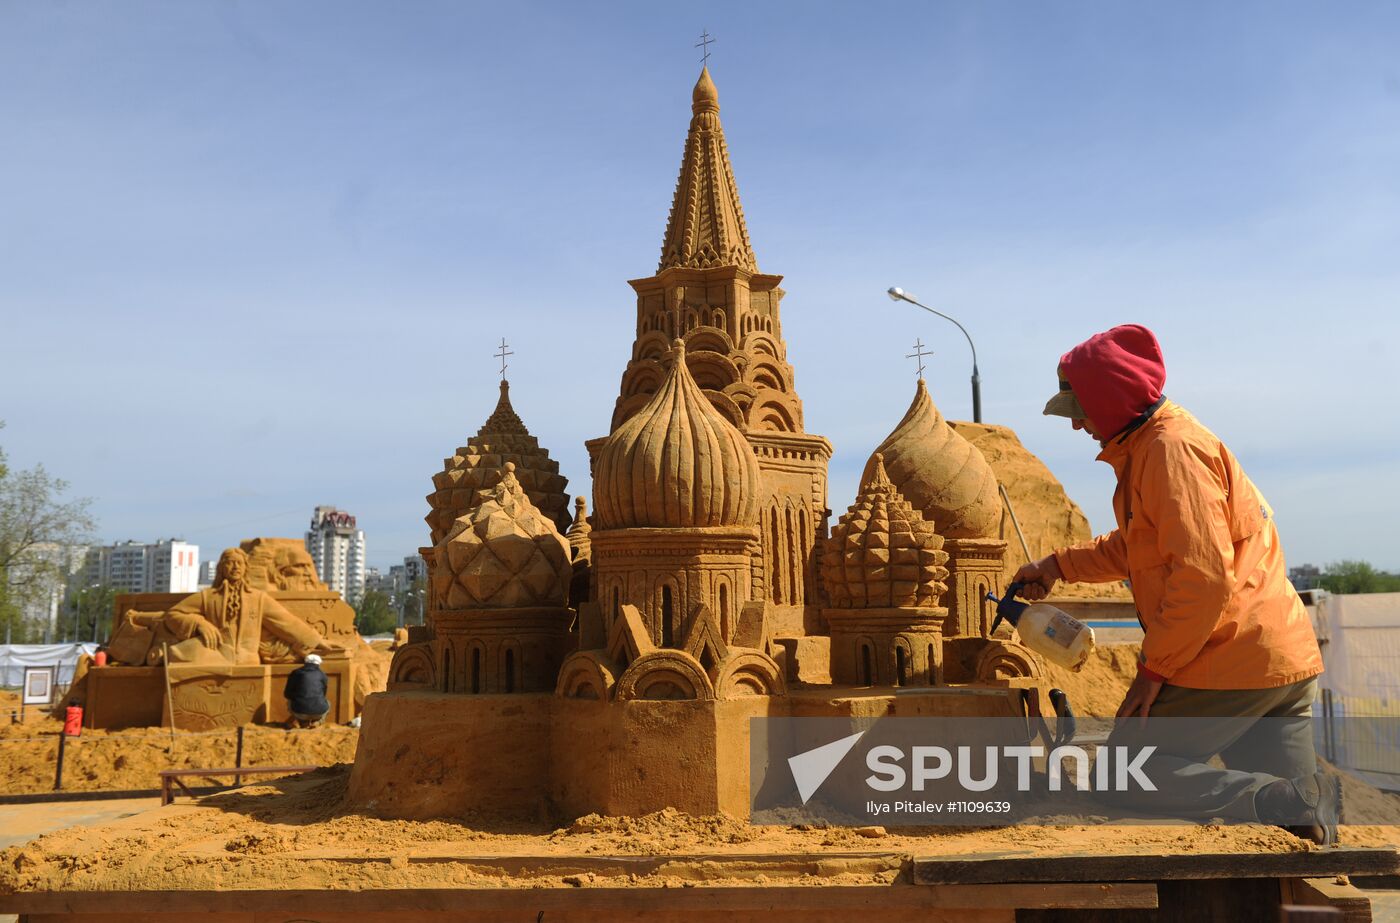 Great History of Russia, exhibition of sand sculpture